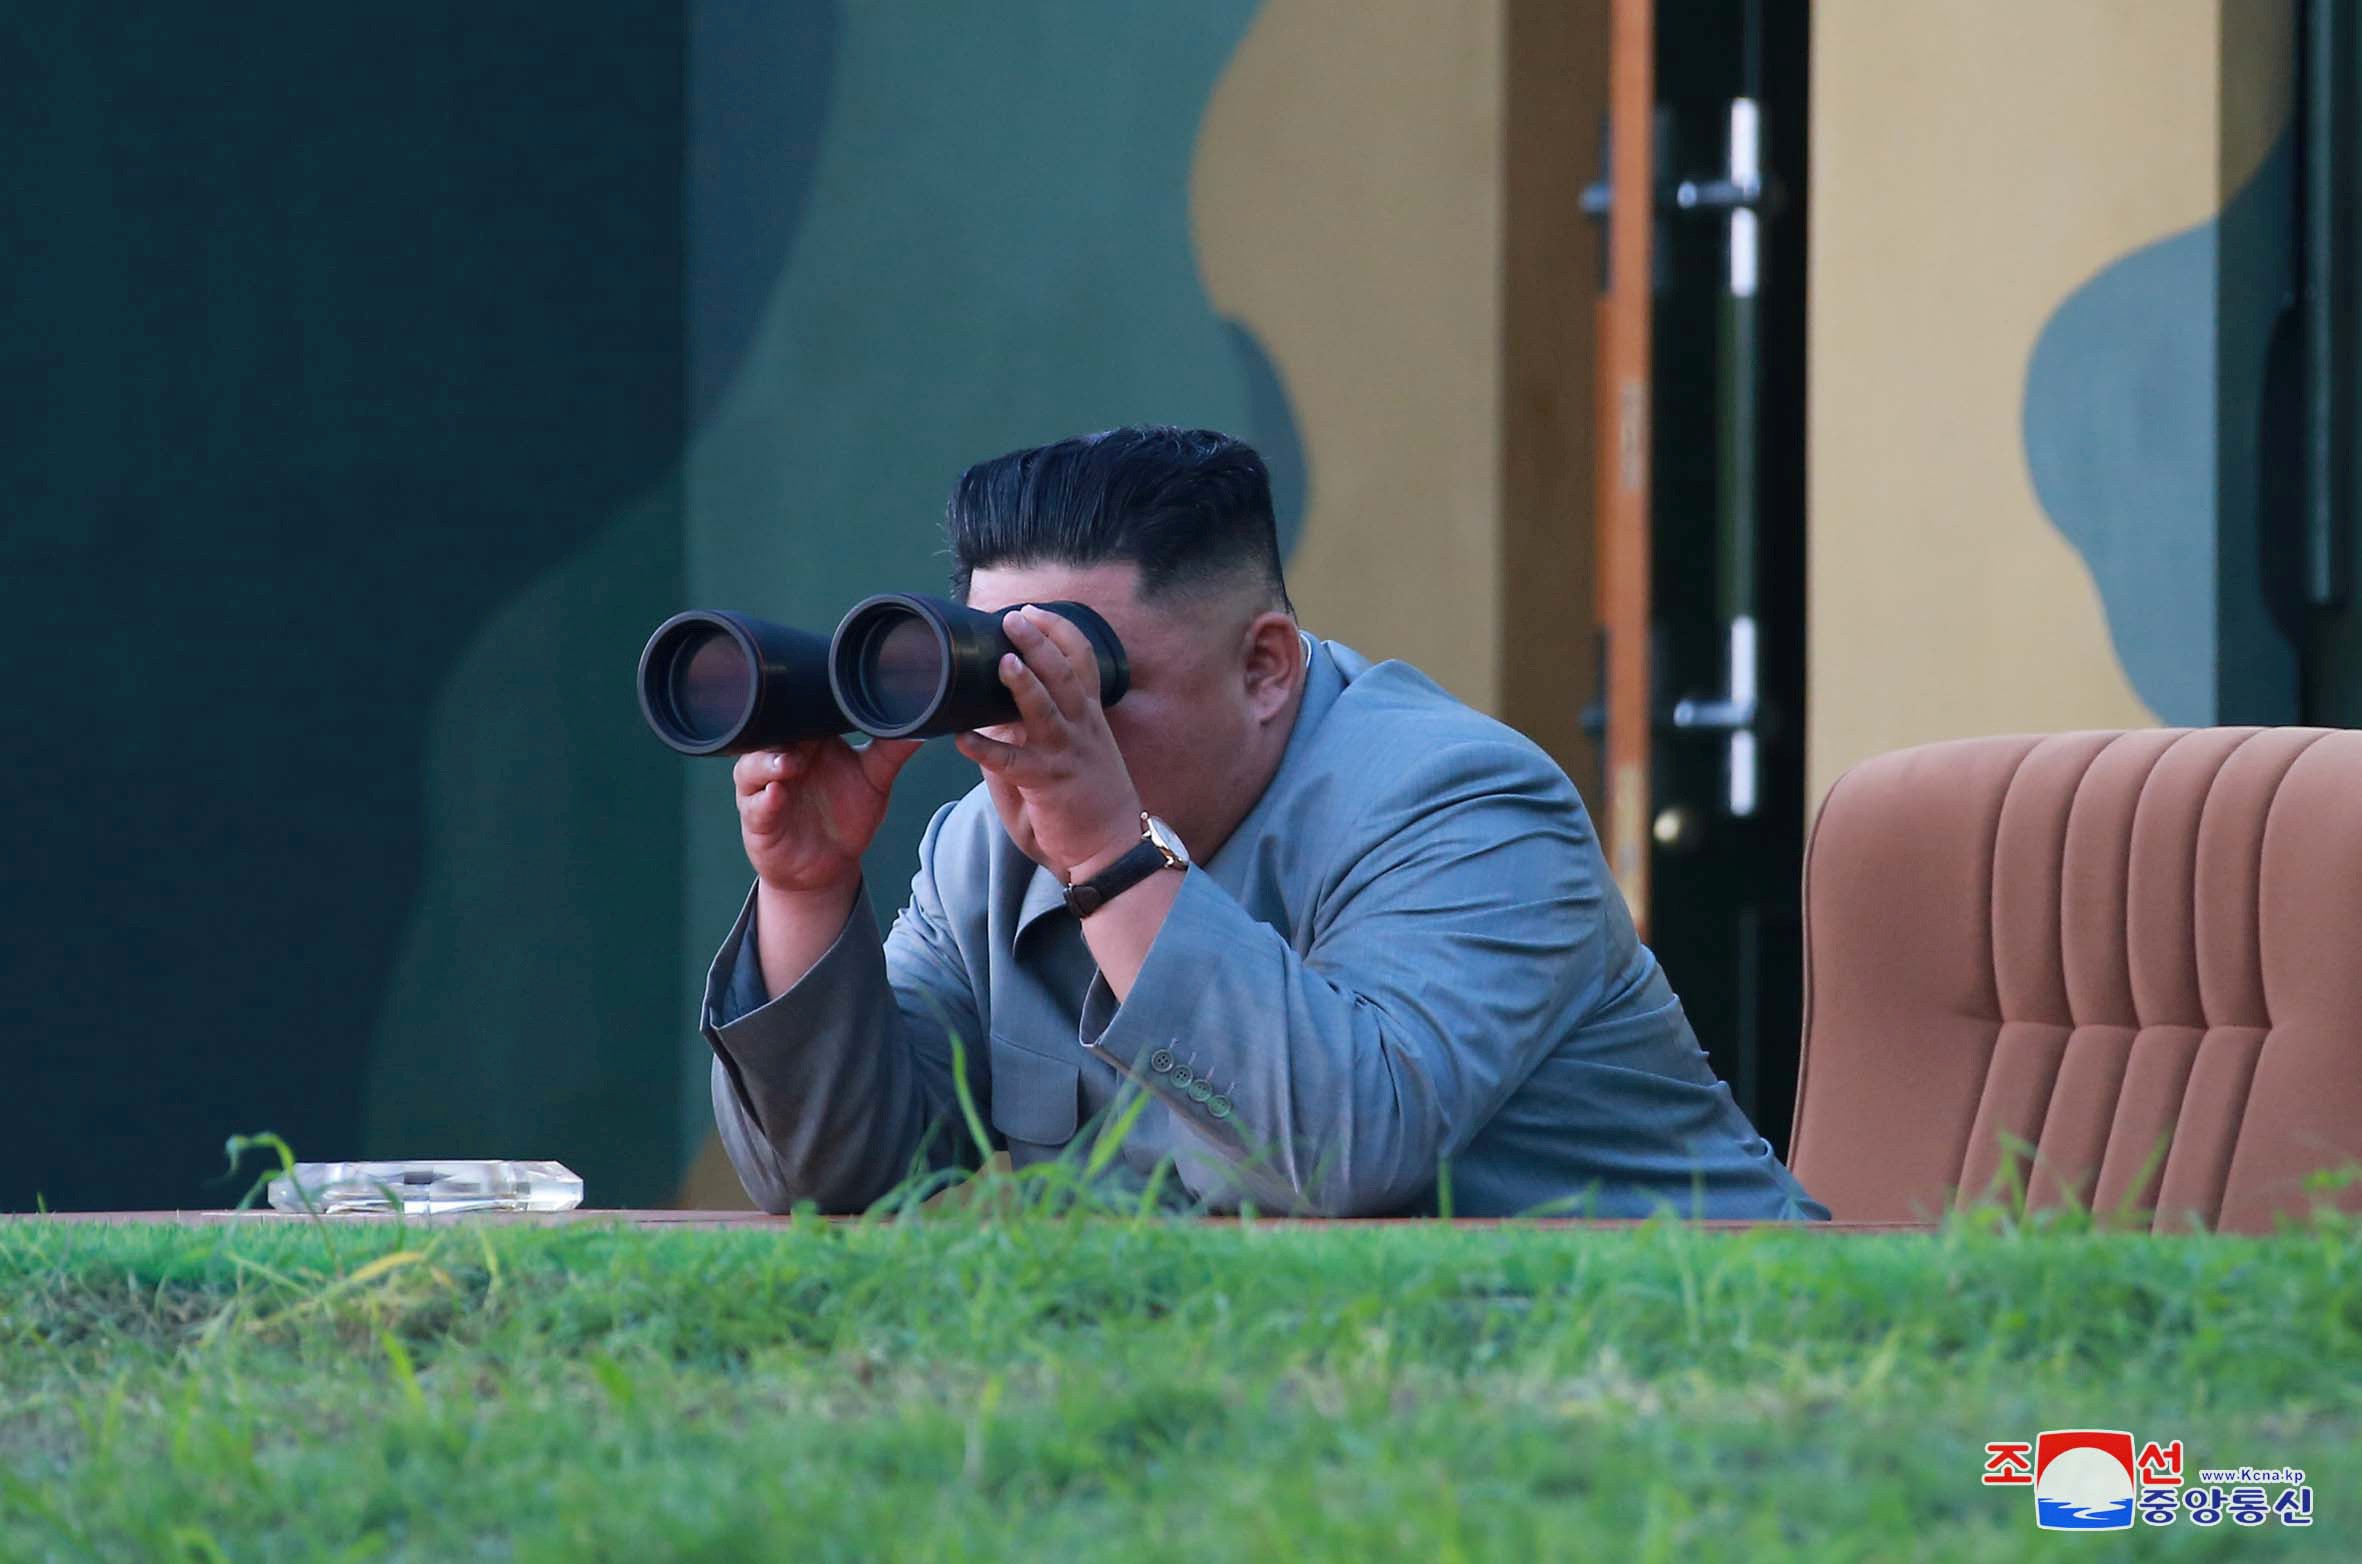 Kim Jong-un watches a missile test on July 26 this year. Photo: Reuters